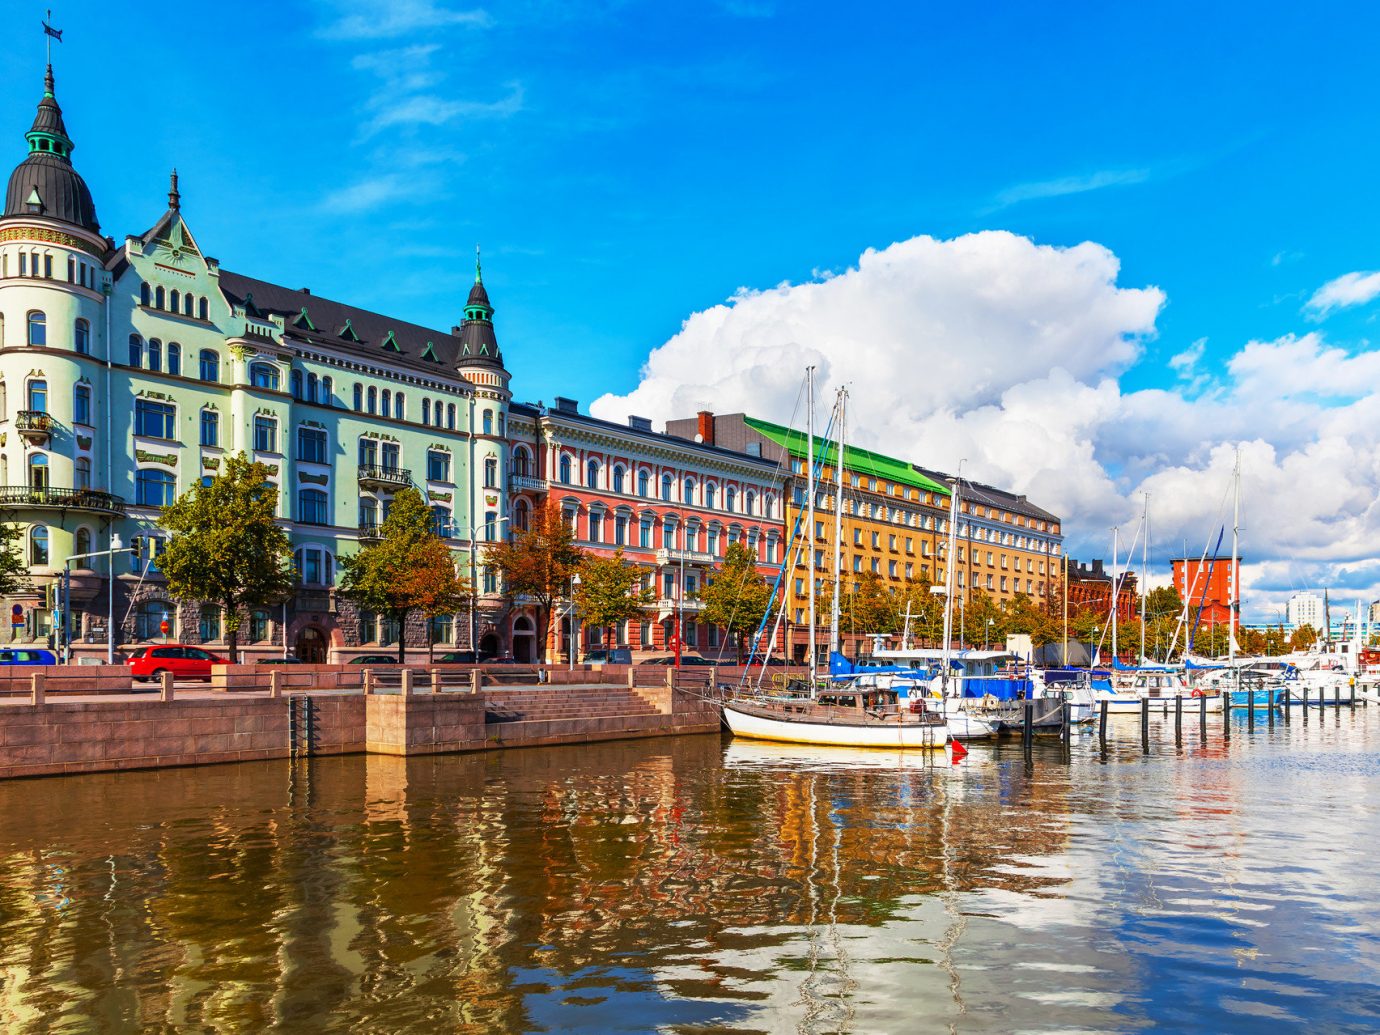 Finland Trip Ideas sky water outdoor scene Town landmark cityscape tourism waterway vacation reflection Harbor River Canal Resort palace dock marina